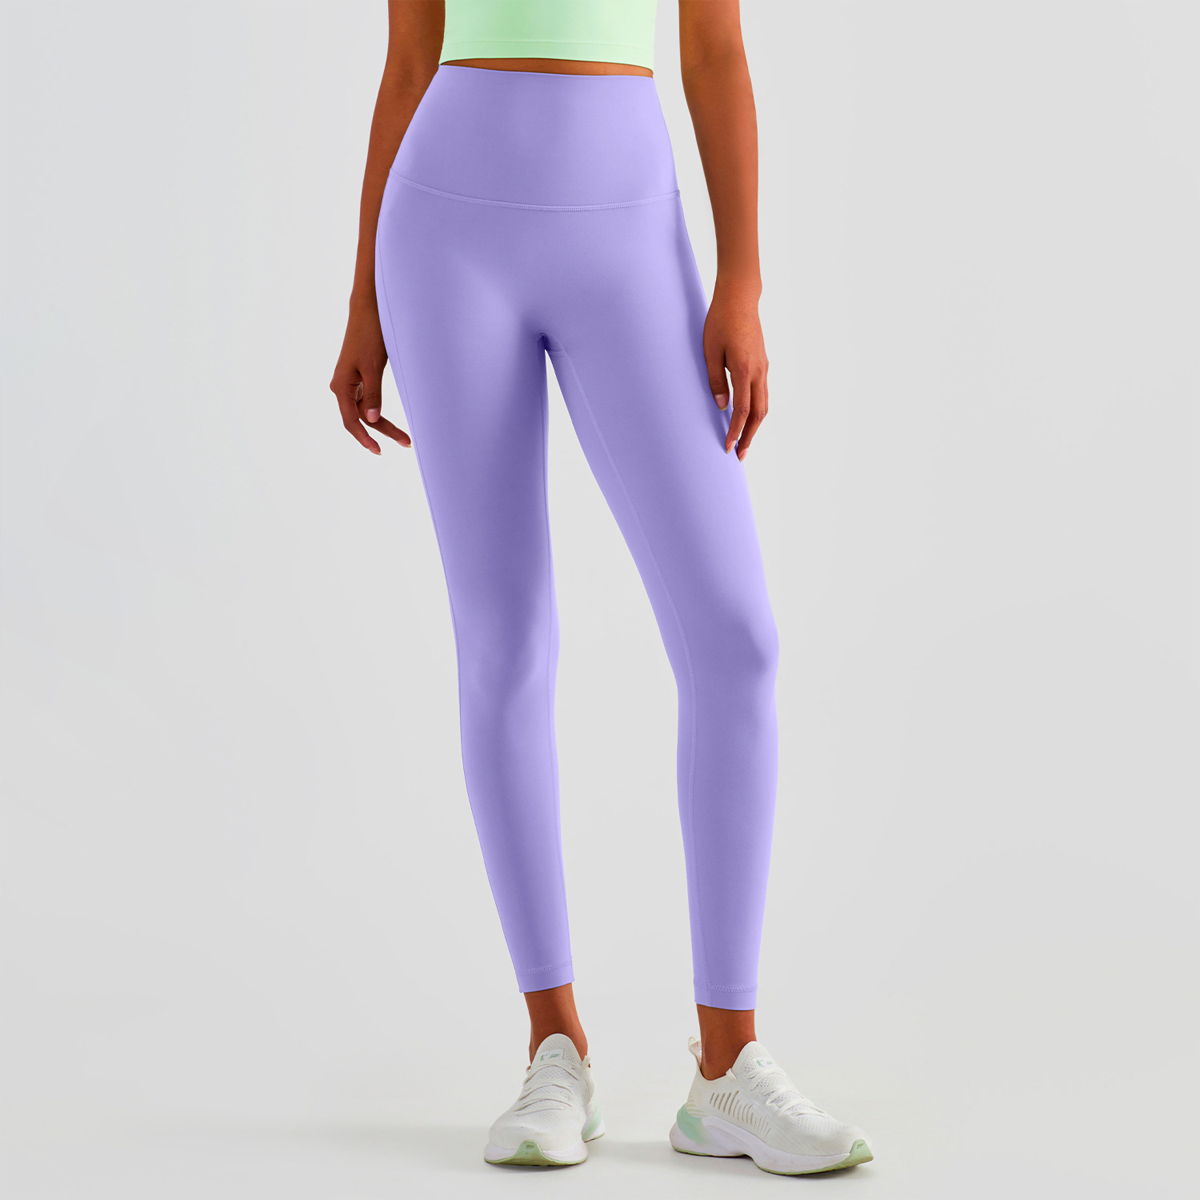 Shop Volleyball Leggings For Women with great discounts and prices